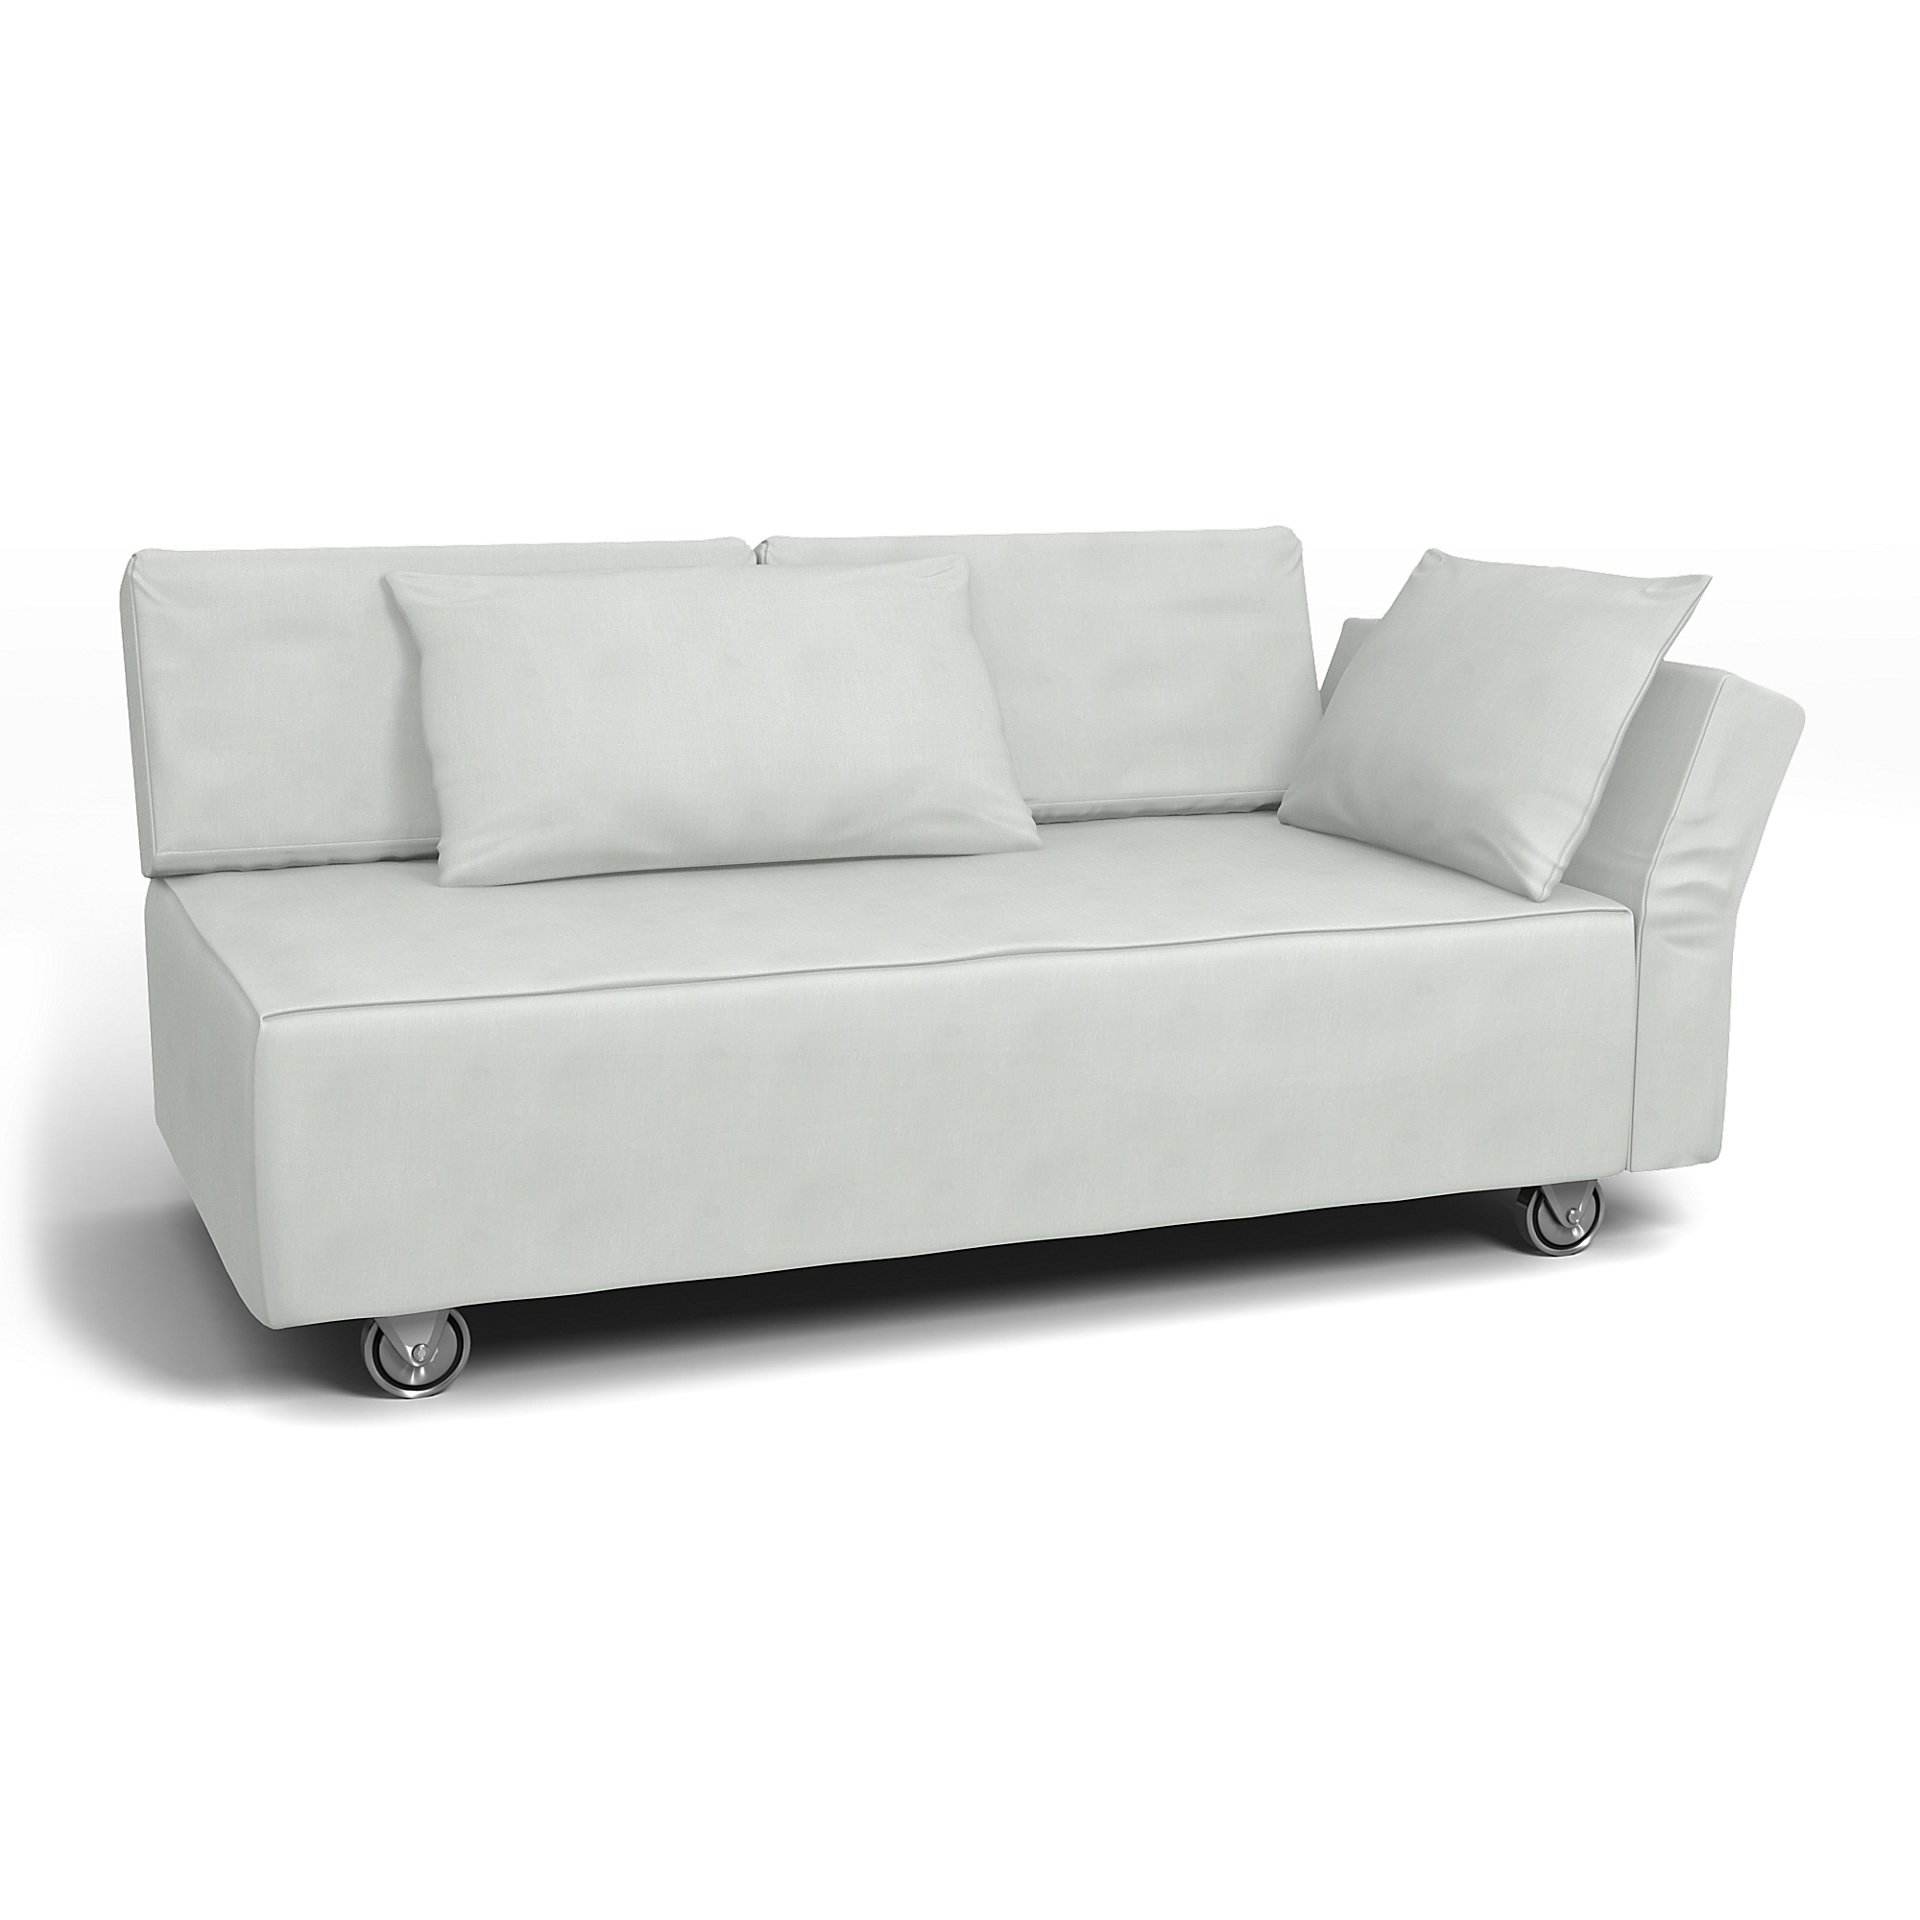 IKEA - Falsterbo 2 Seat Sofa with Right Arm Cover, Silver Grey, Linen - Bemz